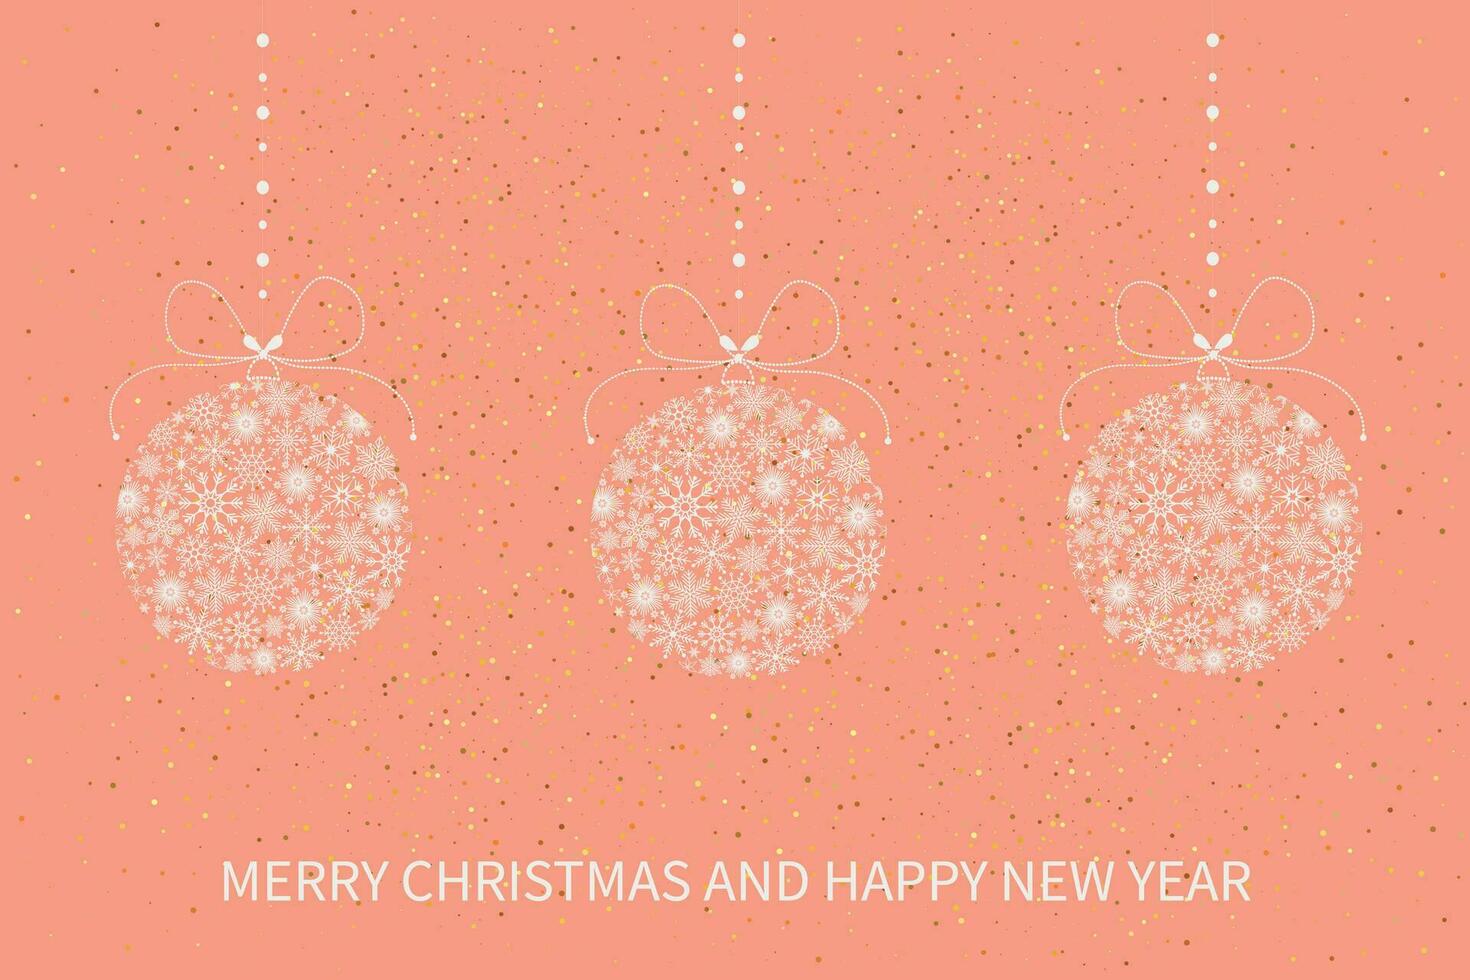 Festive Christmas card with Christmas balls made of snowflakes. Merry Christmas and Happy New Year greeting card. Vector illustration